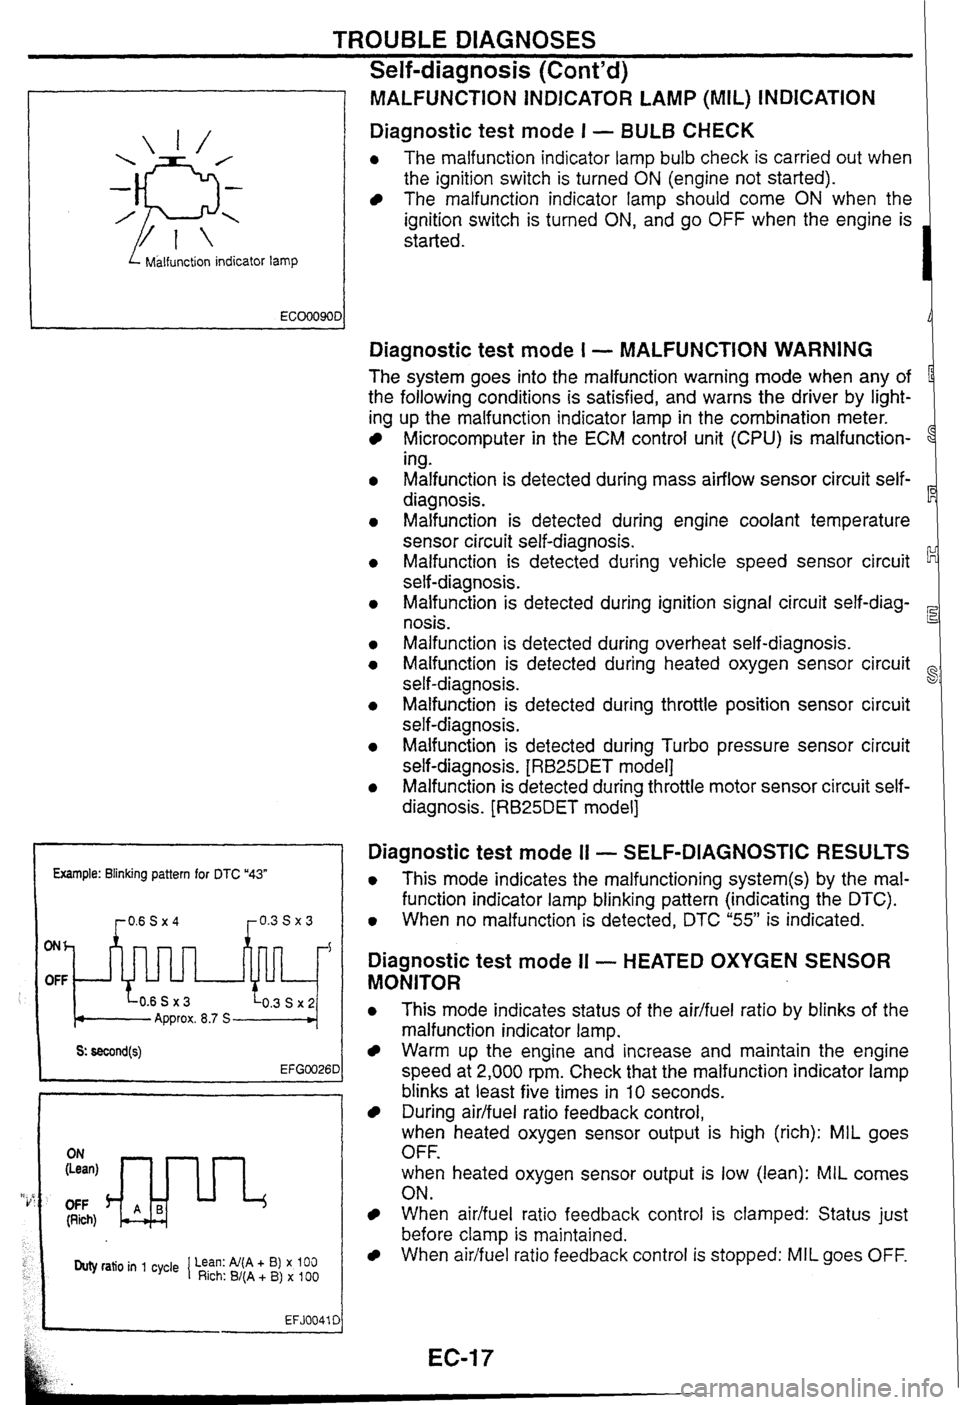 NISSAN GT-R 1998  Service Manual 
TROUBLE DIAGNOSES 
Self-diagnosis (Contd) 
I  Malfunction indicator lamp 
MALFUNCTiON INDICATOR LAMP (MIL) INDICATION 
Diagnostic test  mode I - BULB CHECK 
0 The malfunction indicator lamp  bulb ch